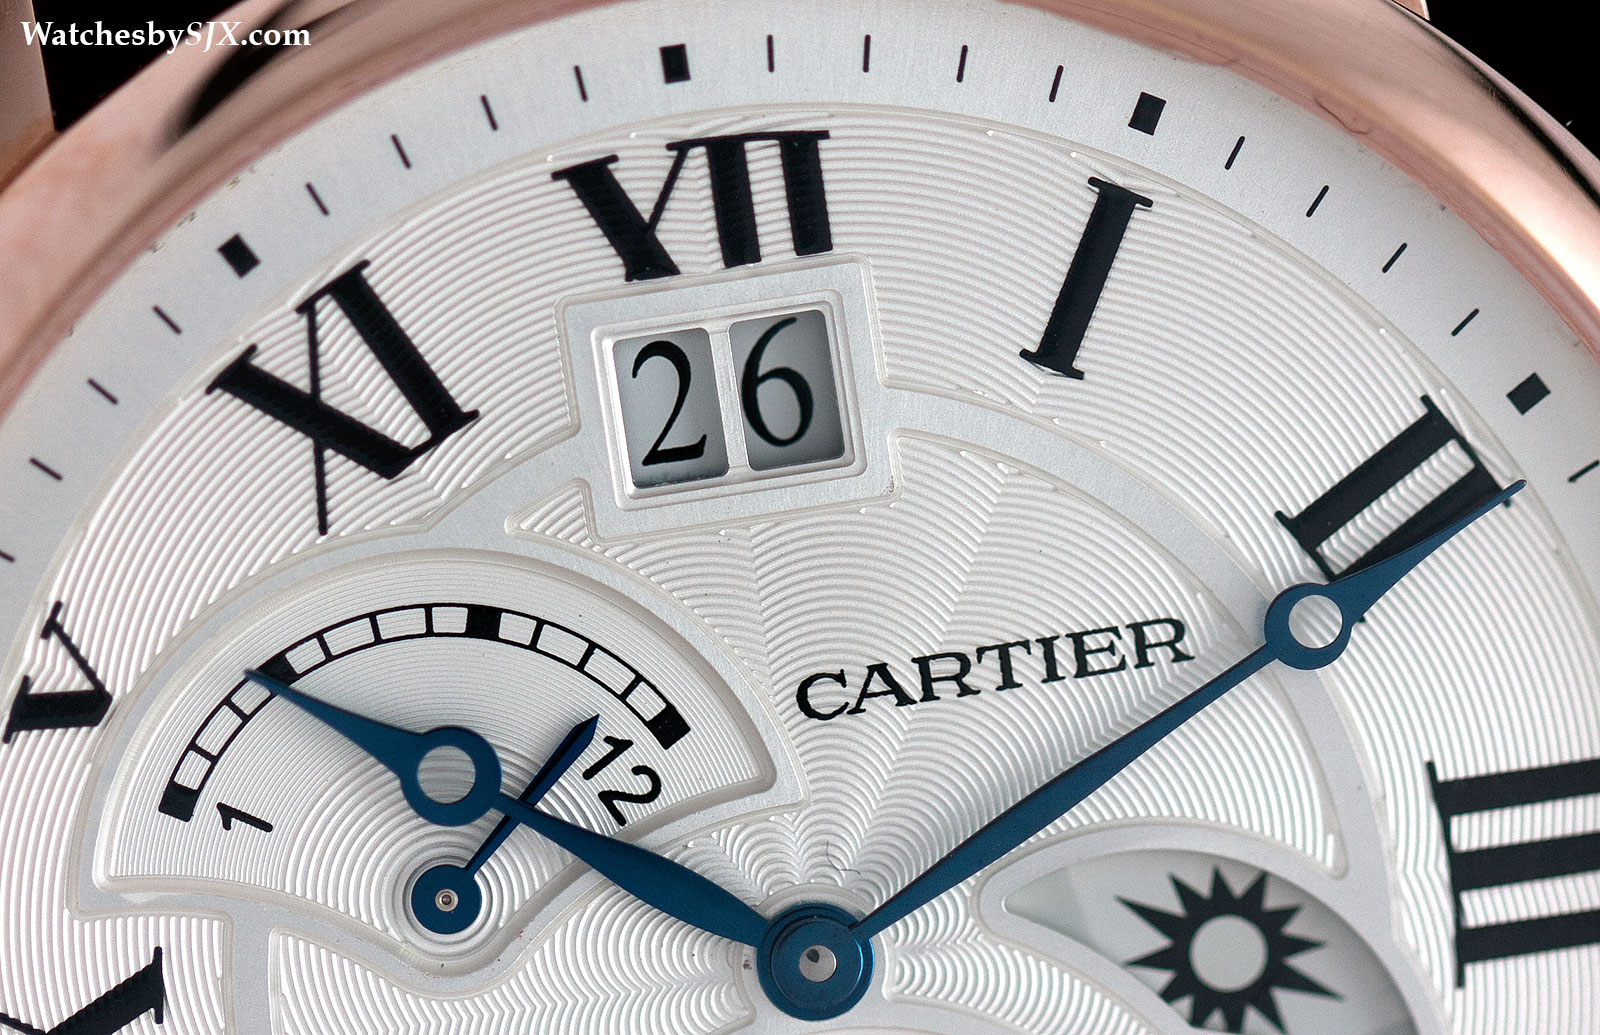 Hands-On With The Rotonde De Cartier Second Time Zone Day/Night (With ...